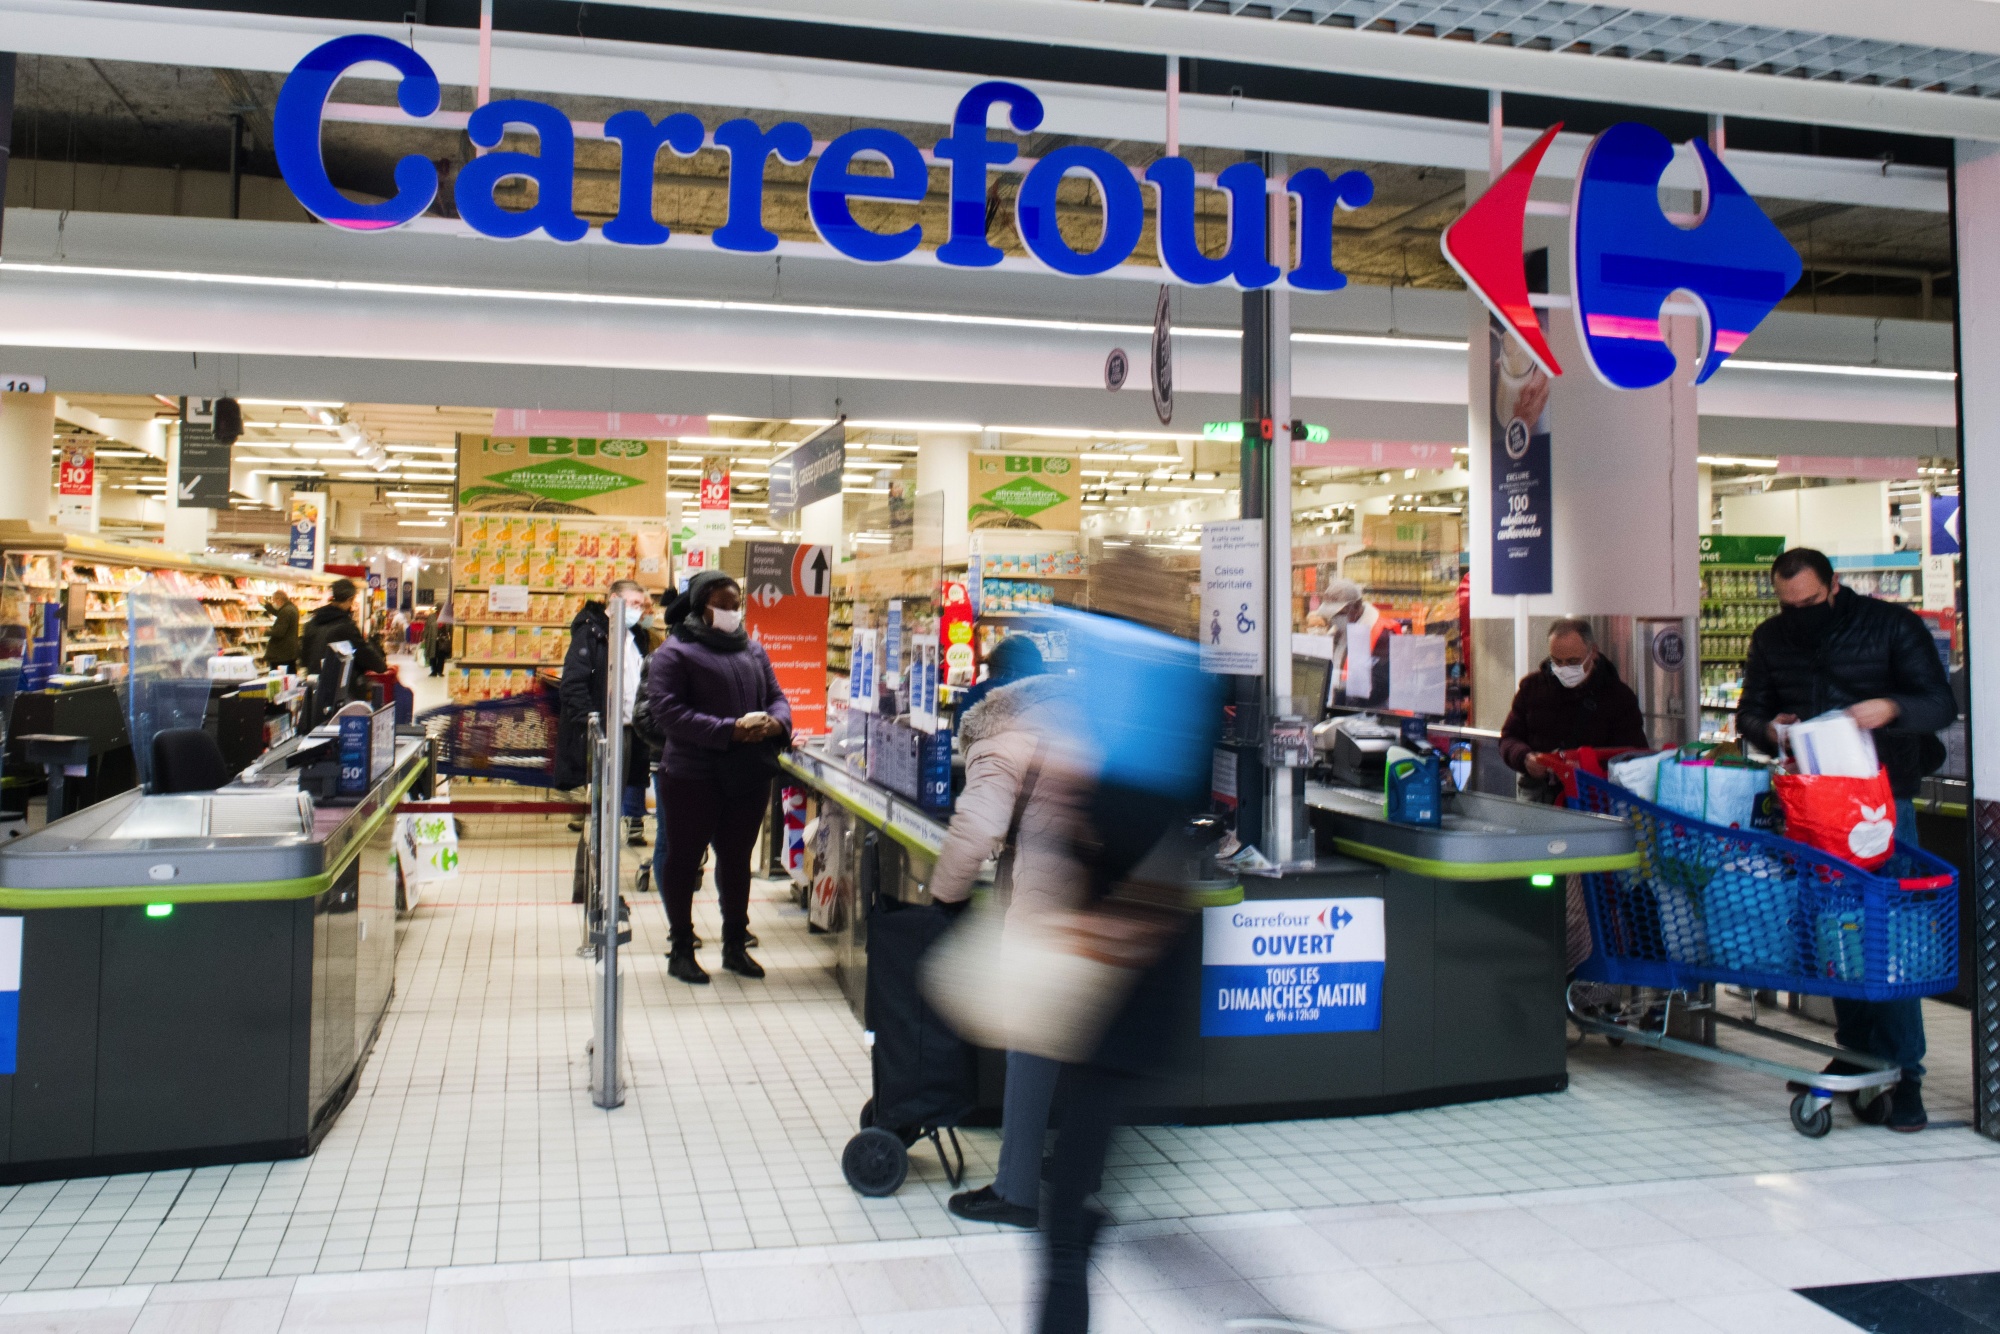 Prize chance for Carrefour fans